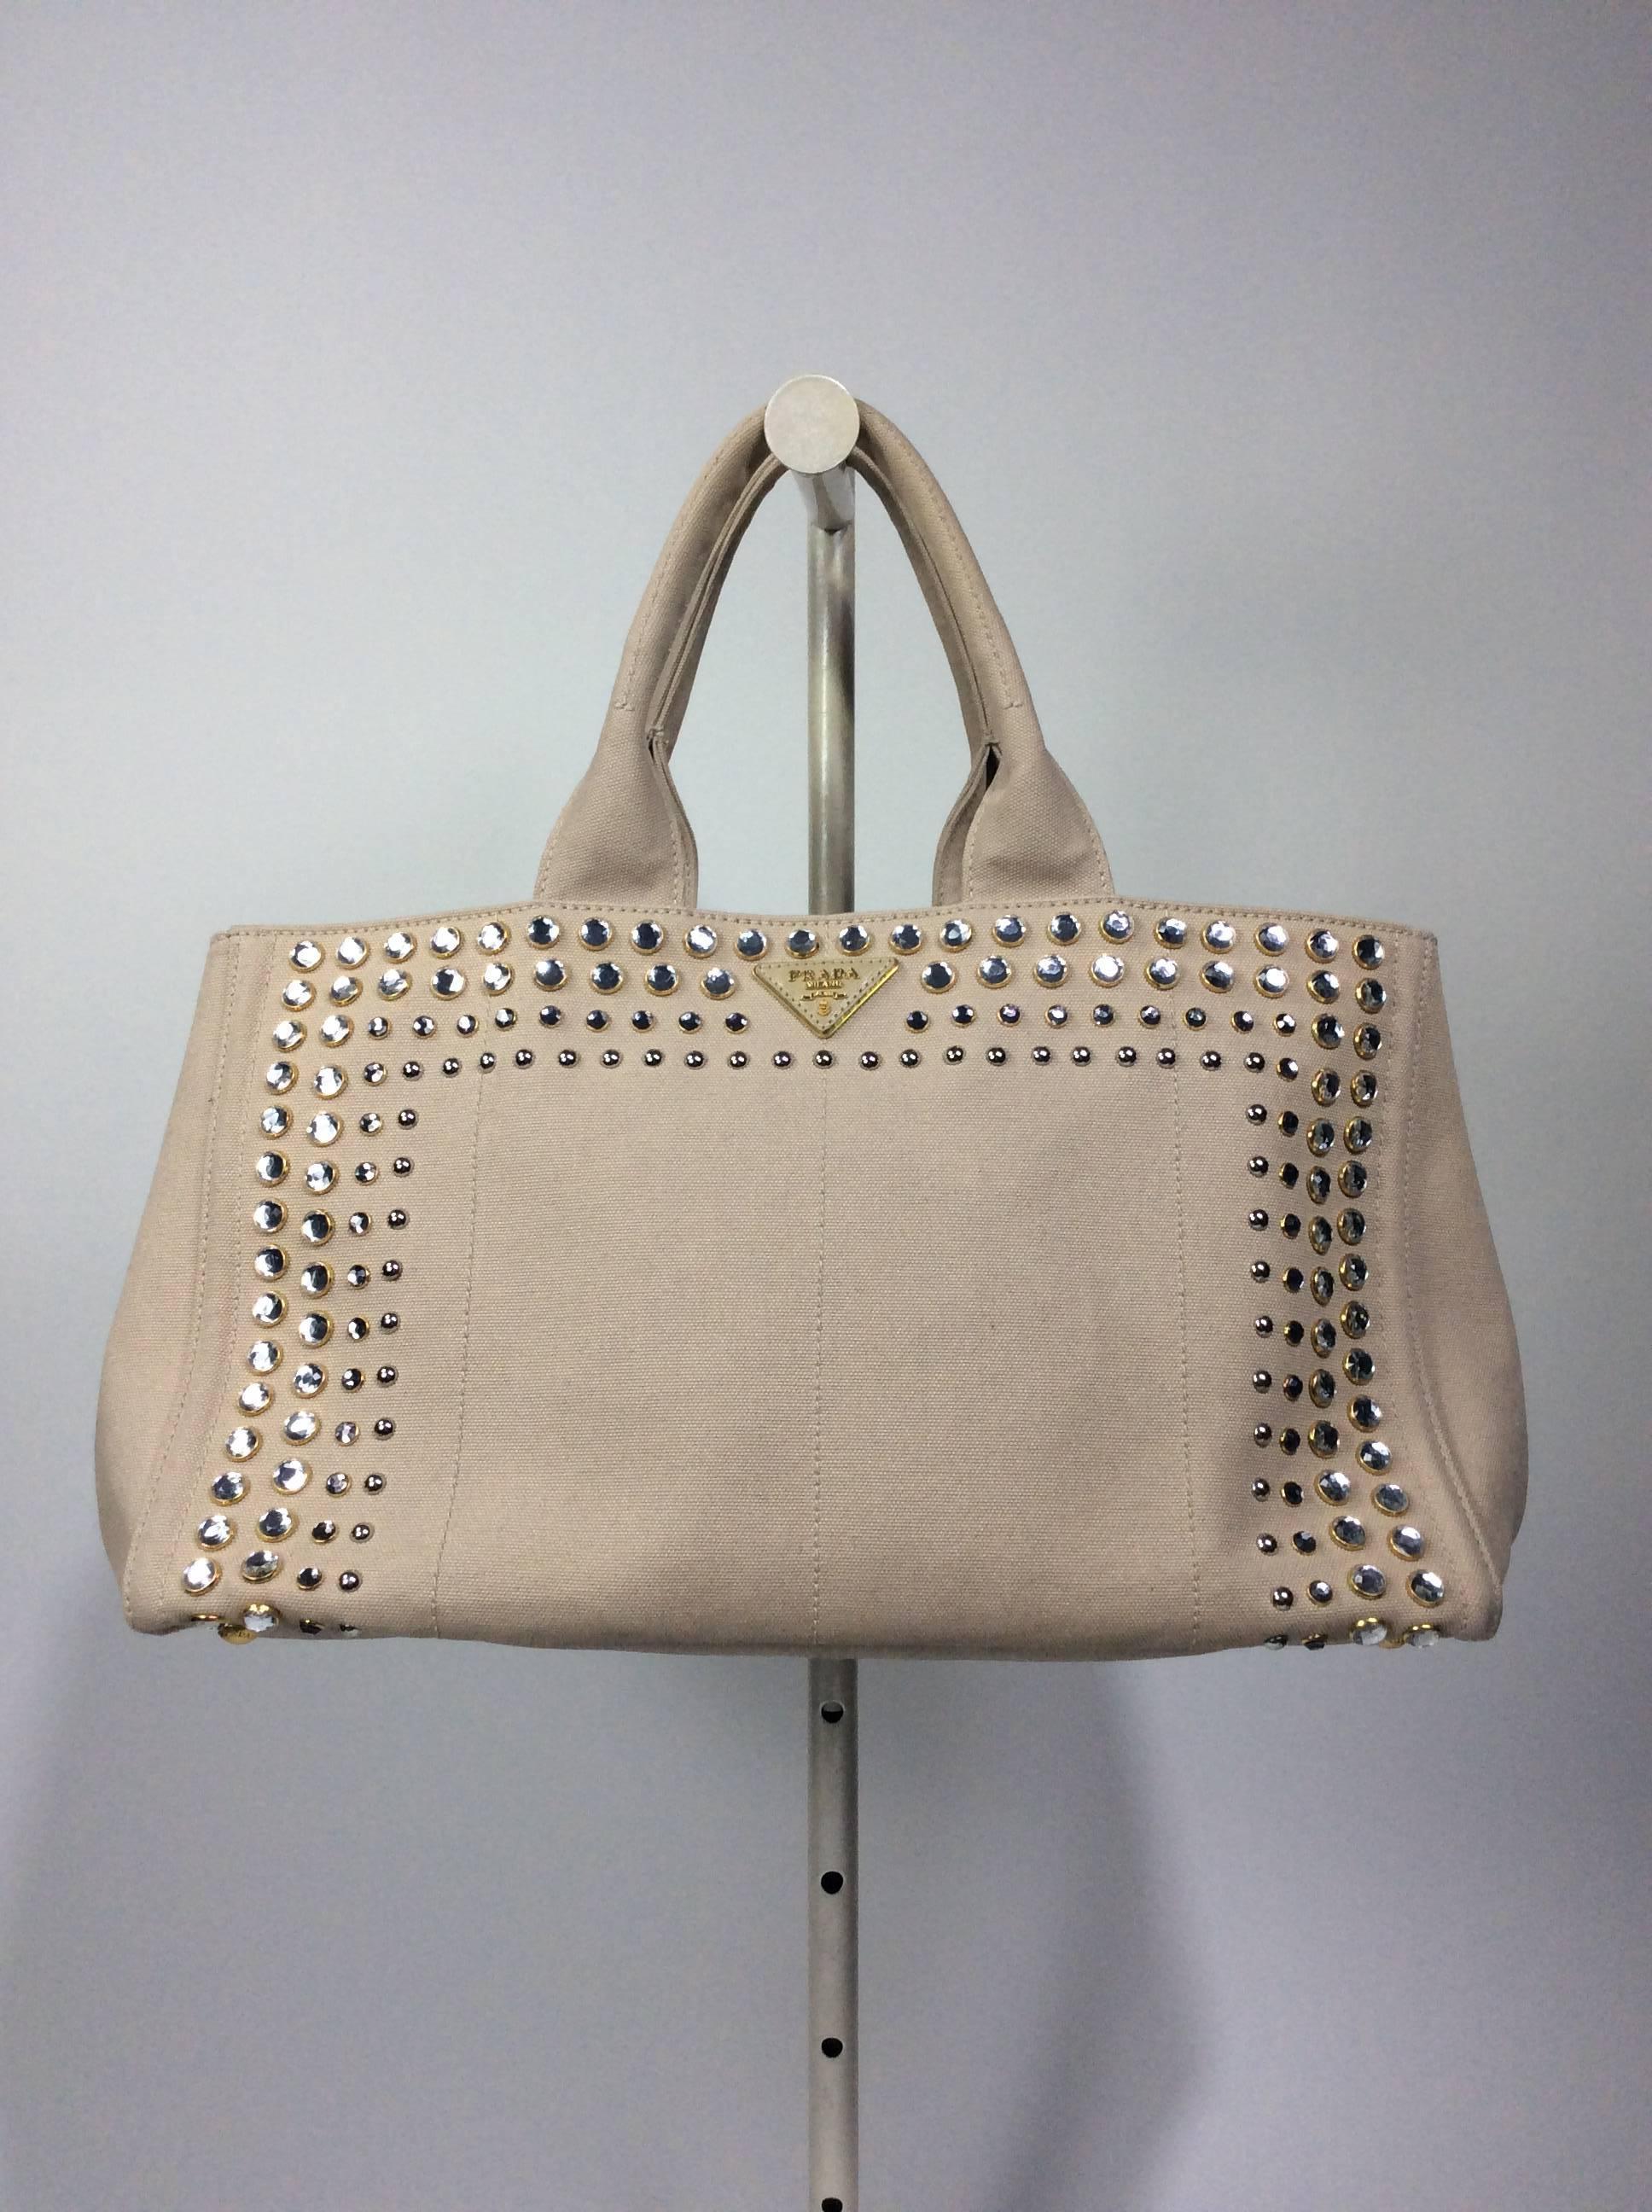 Prada tan canvas Gardner's Tote with crystal beaded detail on front.